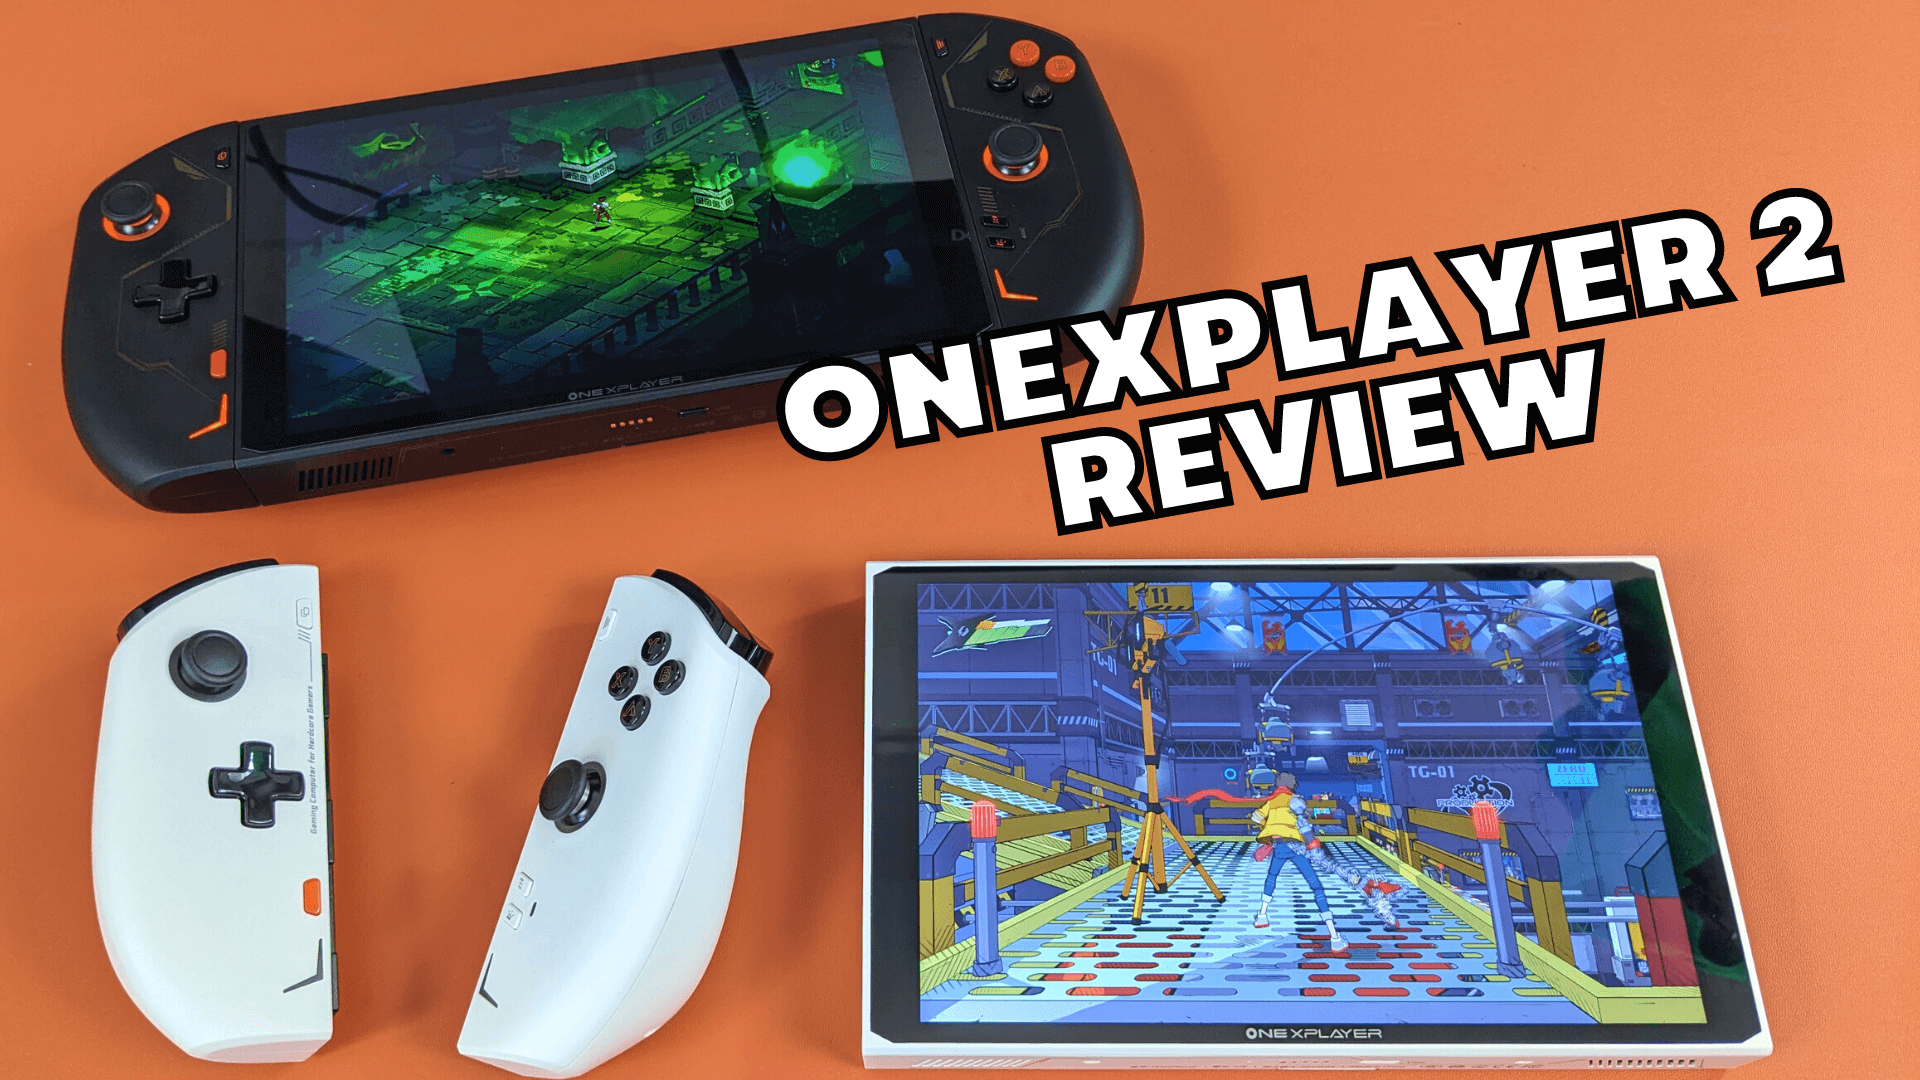 ONEXPLAYER 2 Review – Is this the best handheld gaming PC?